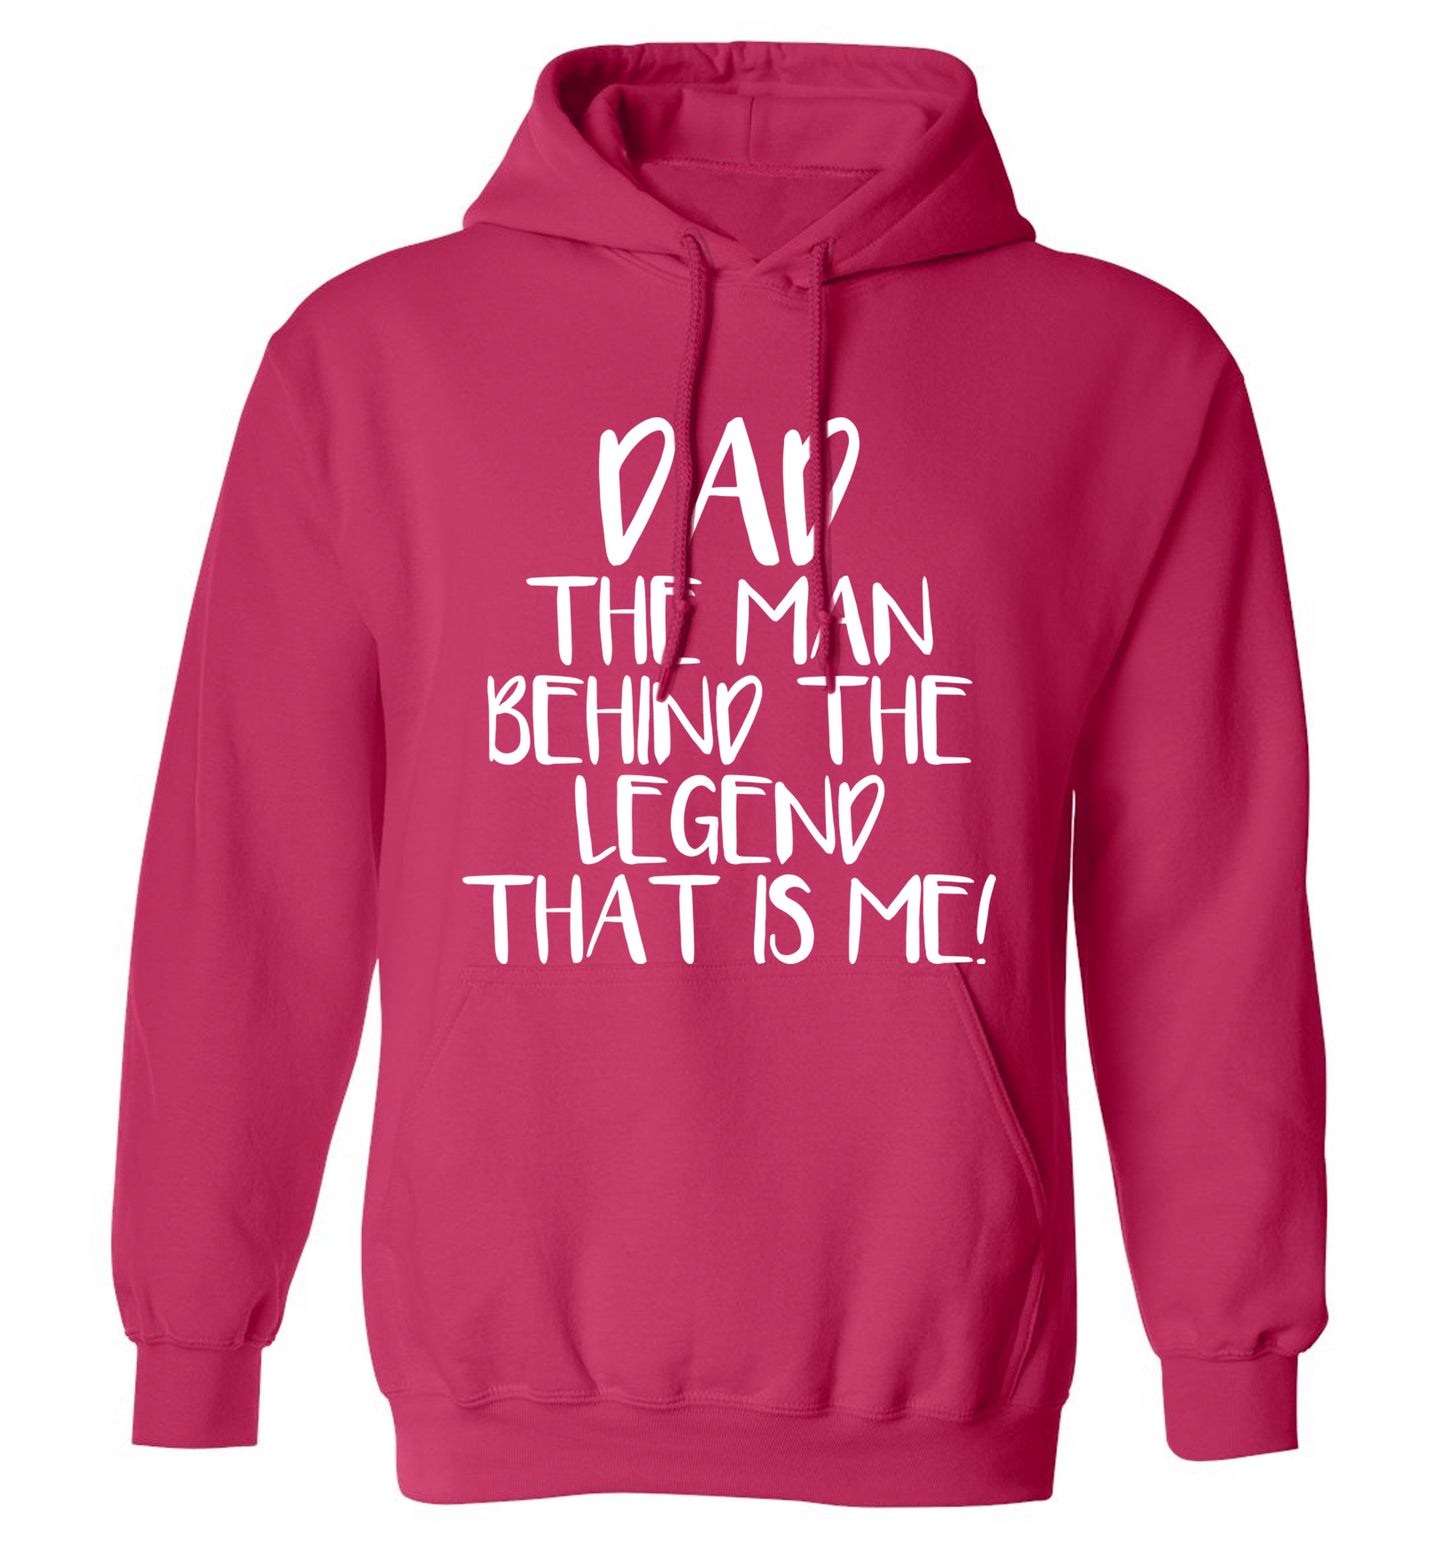 Dad the man behind the legend that is me! adults unisex pink hoodie 2XL